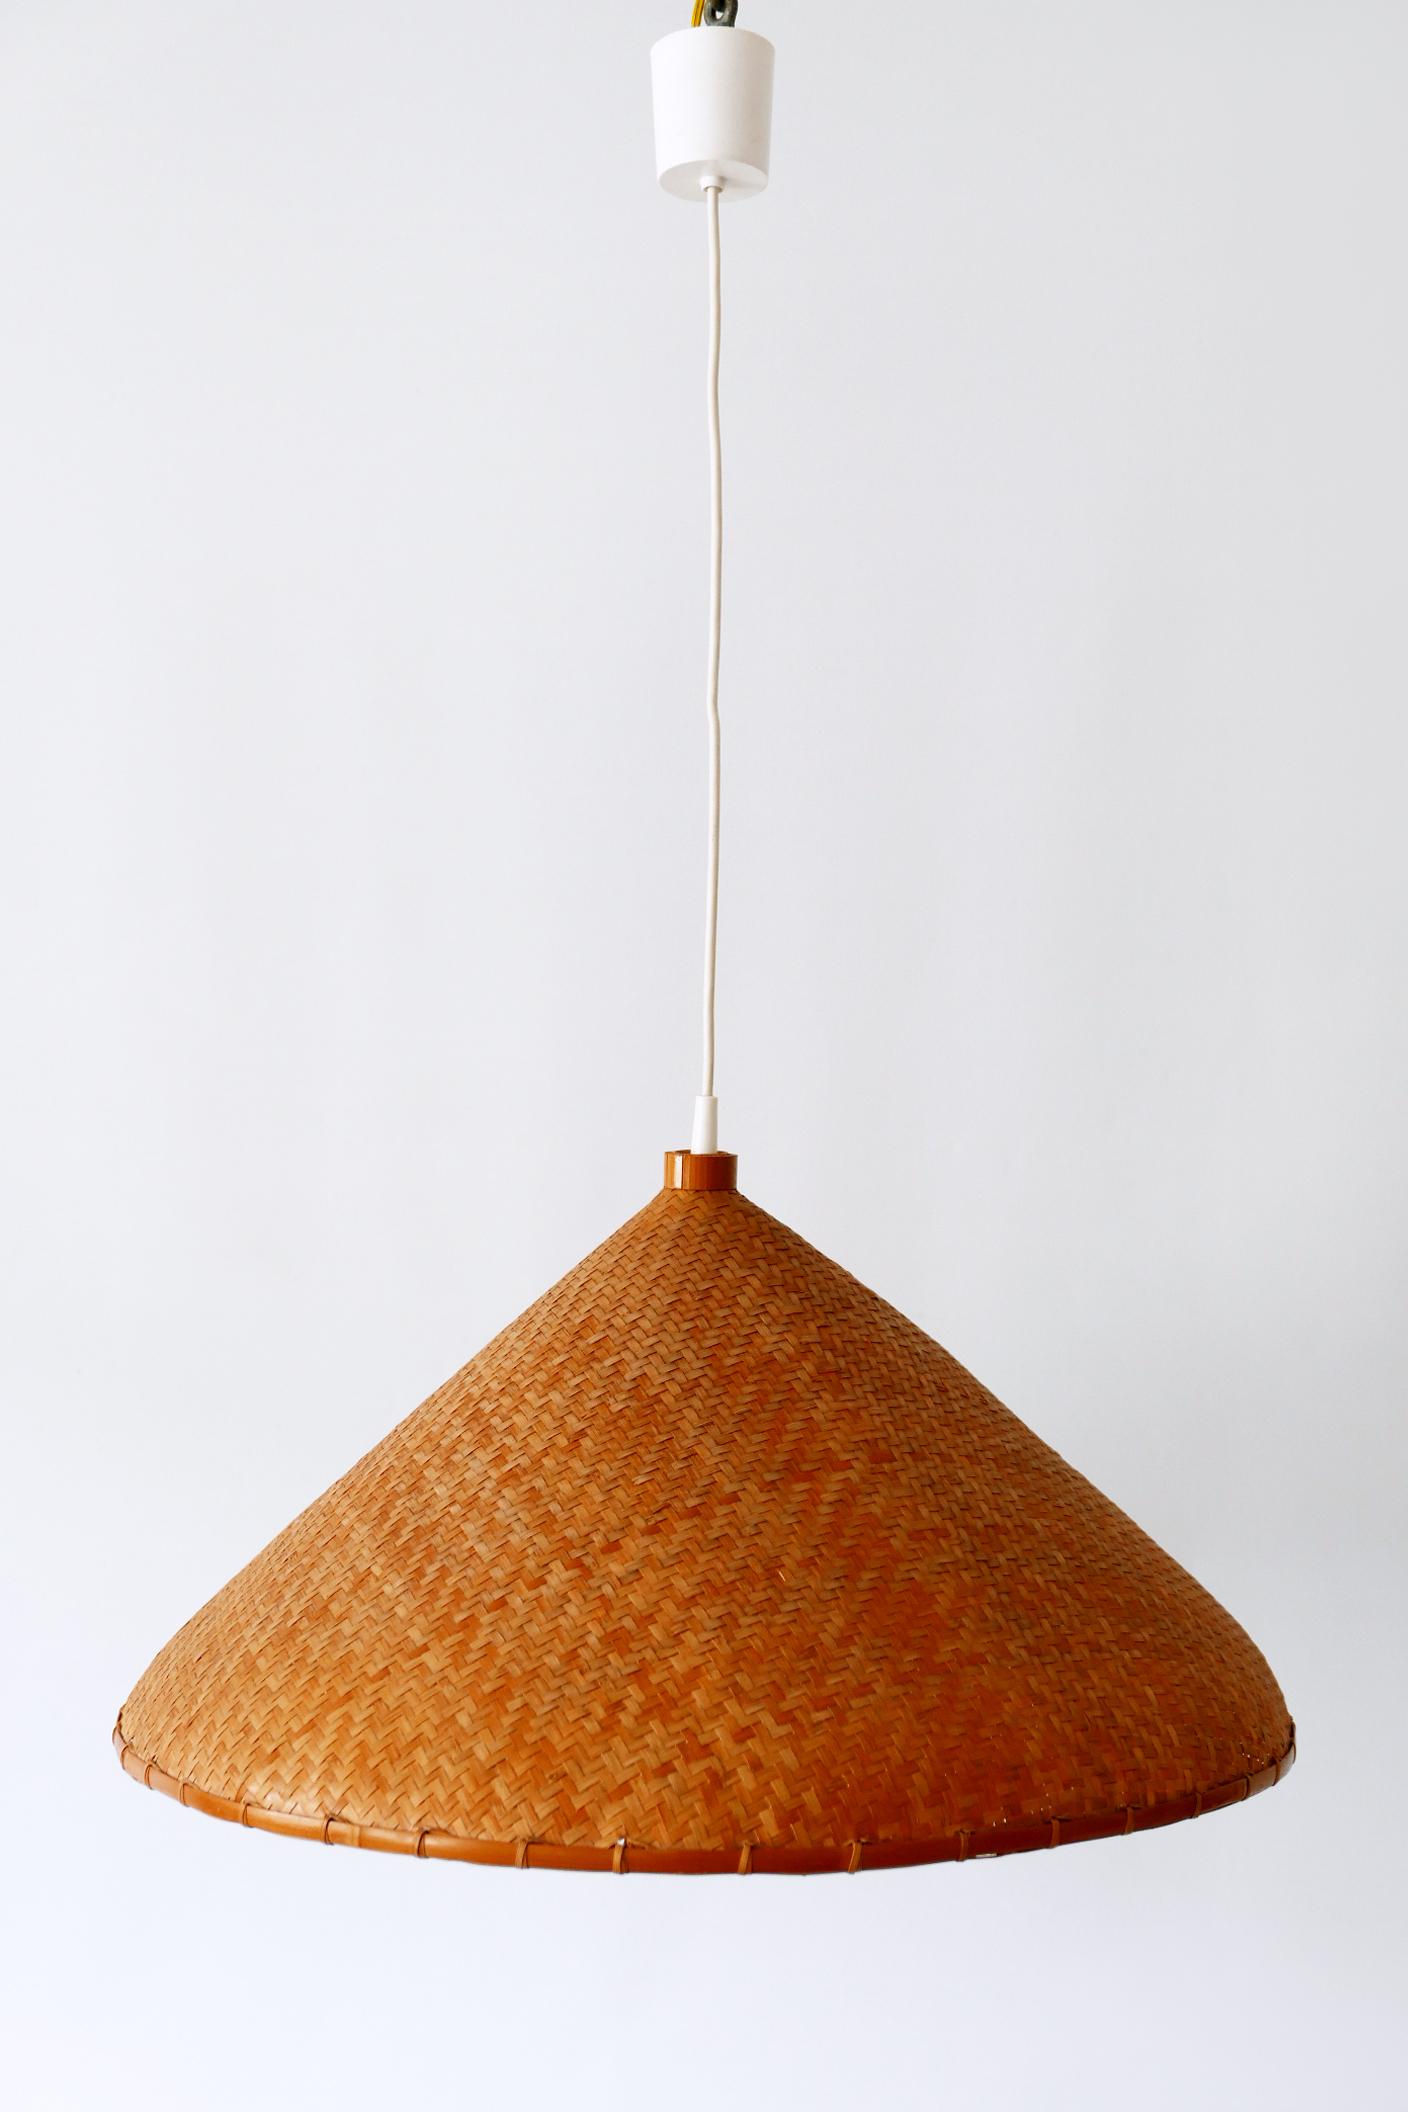 Large Mid-Century Modern Wicker Pendant Lamp or Hanging Light, Germany, 1960s In Good Condition For Sale In Munich, DE